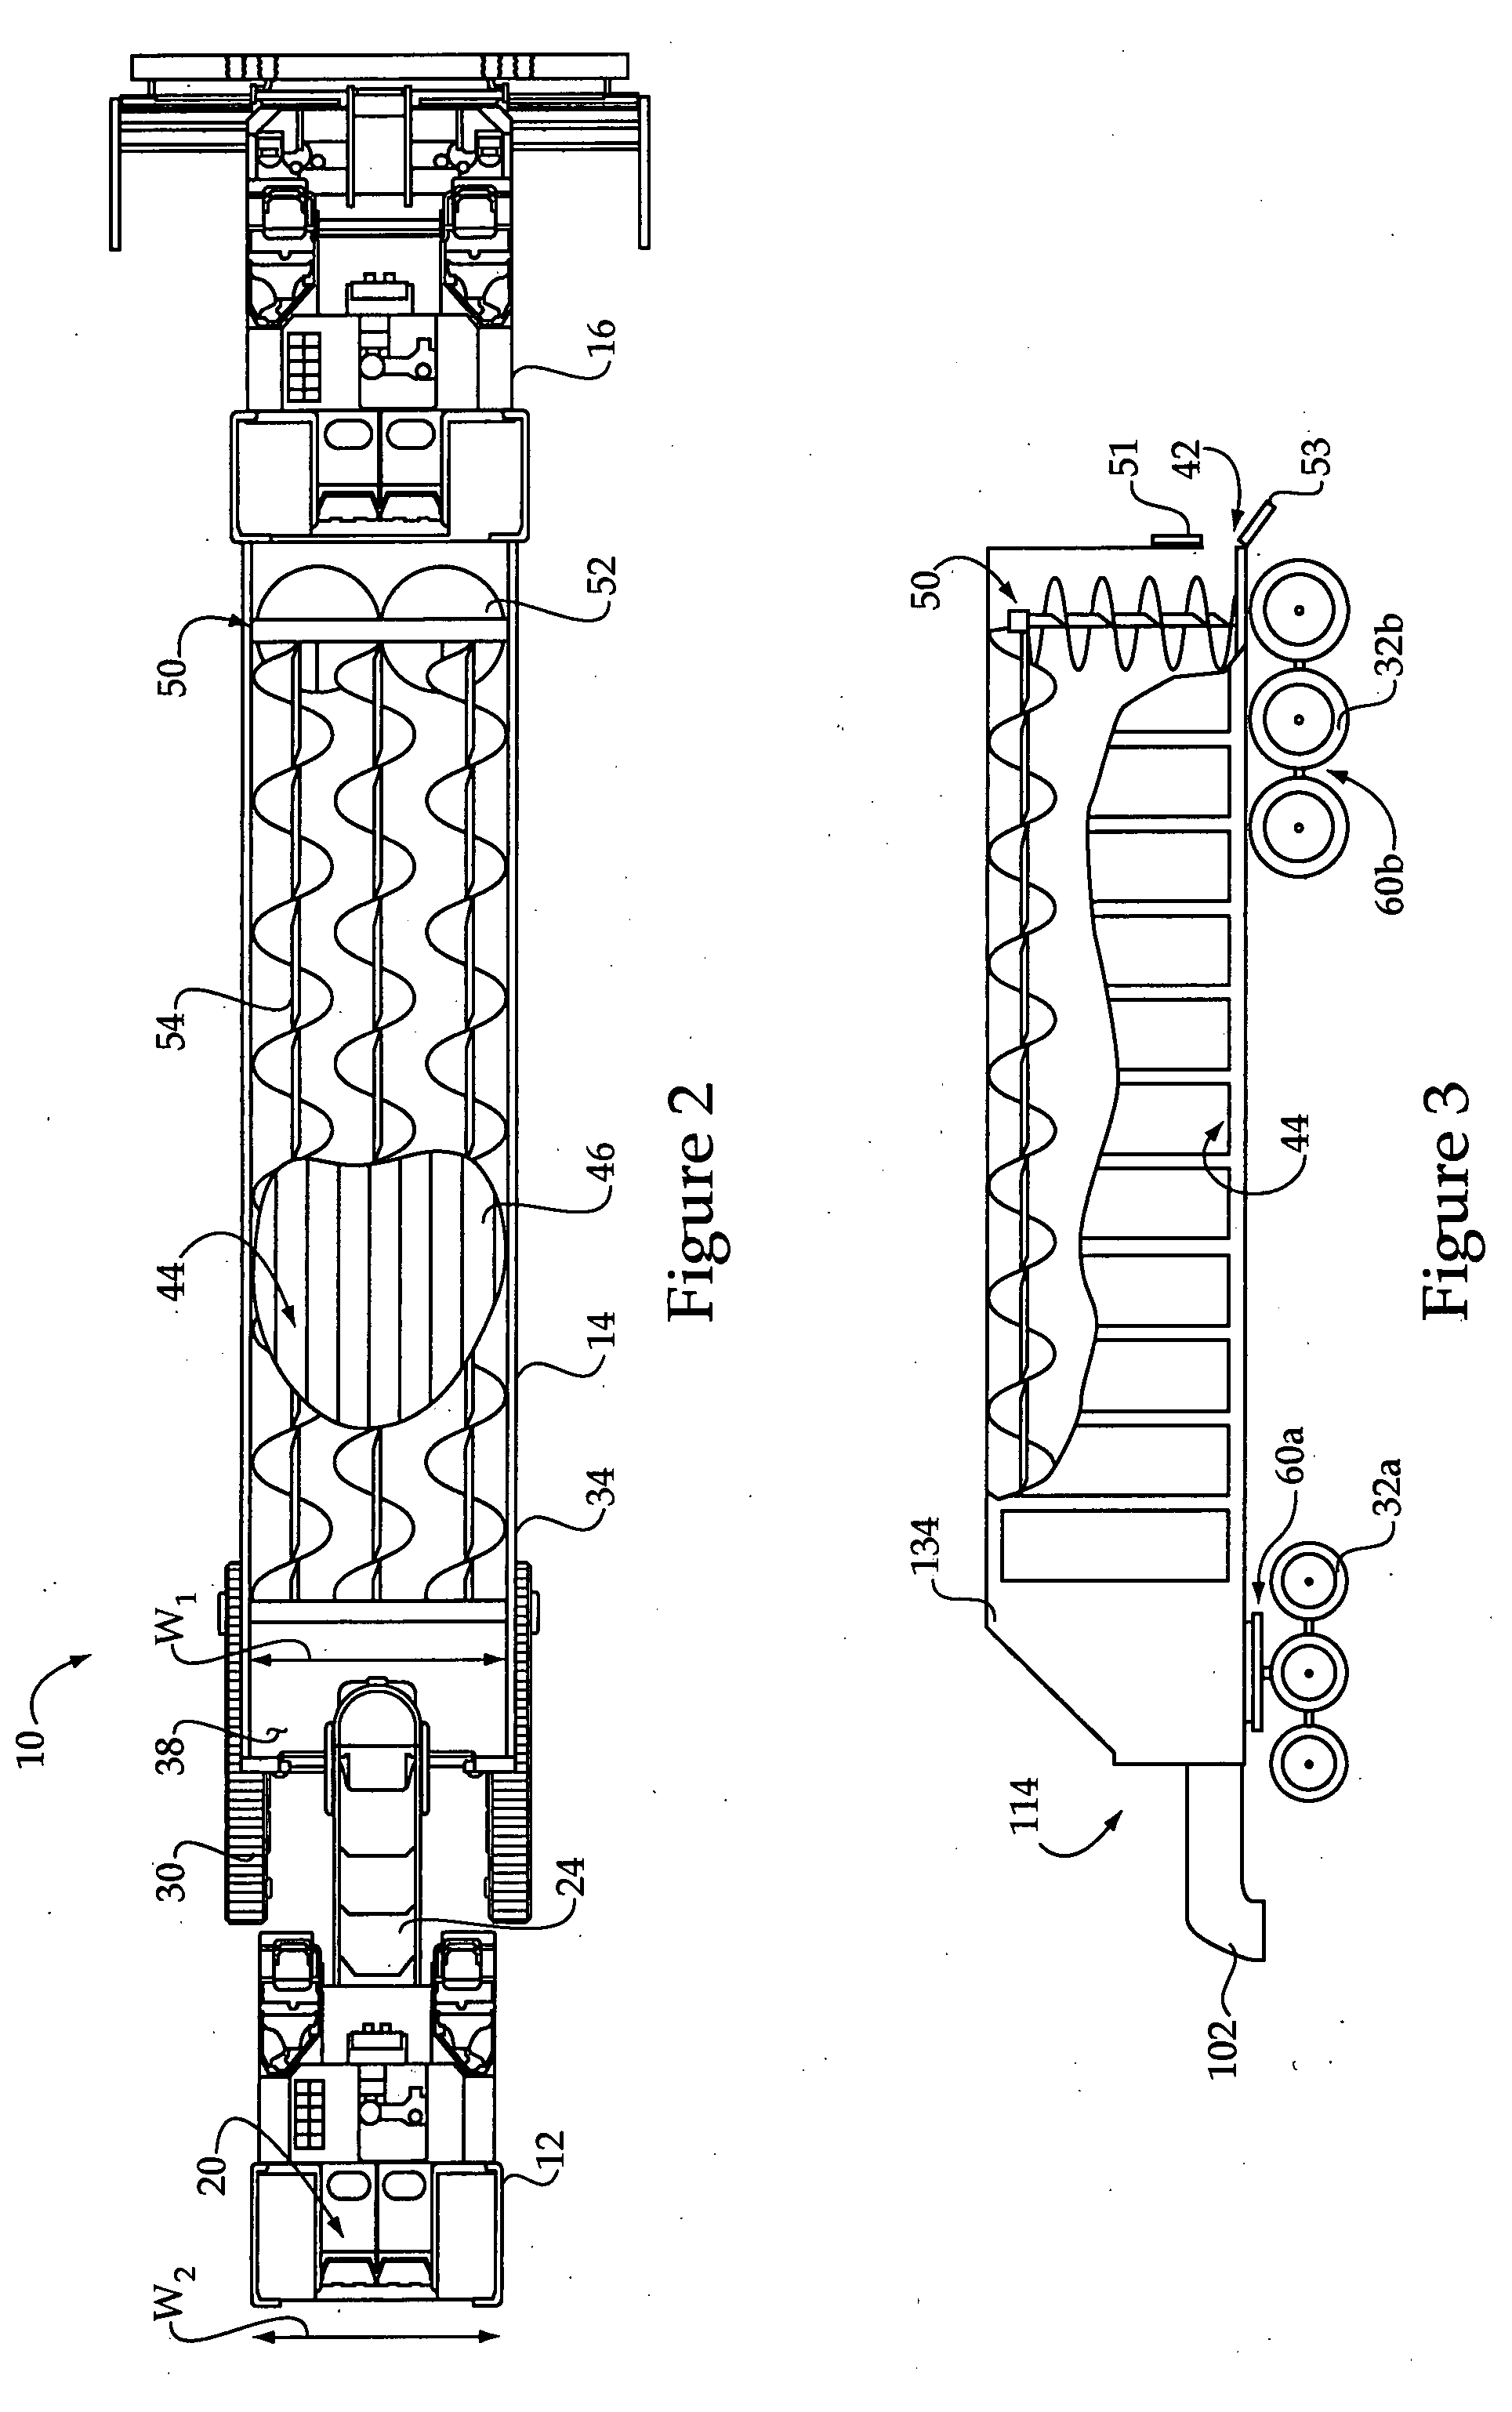 Transfer machine, system and paving material transfer method